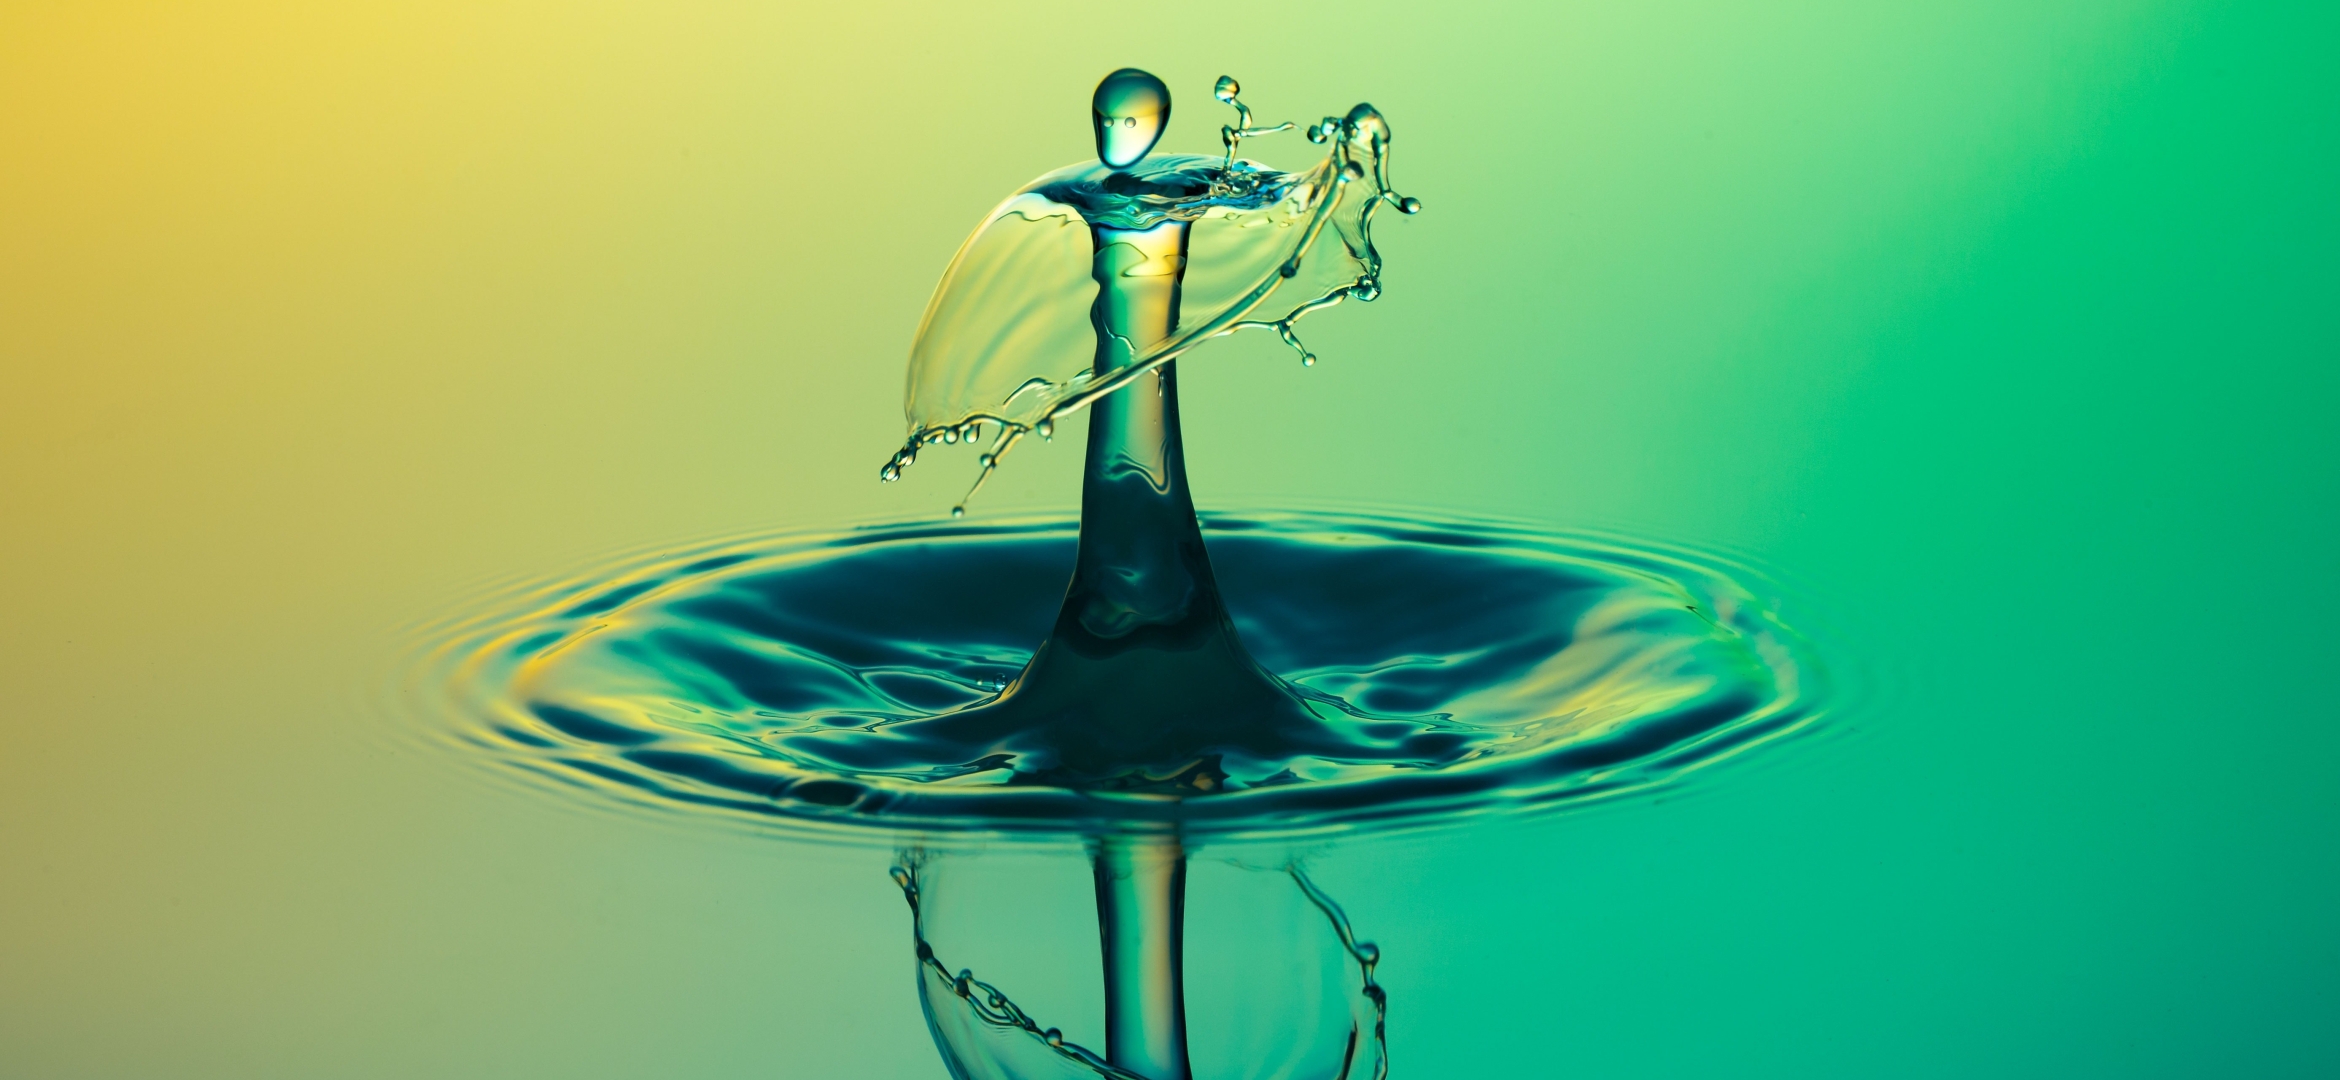 2340x1080 Water Droplet Reflection 2340x1080 Resolution Wallpaper, HD ...